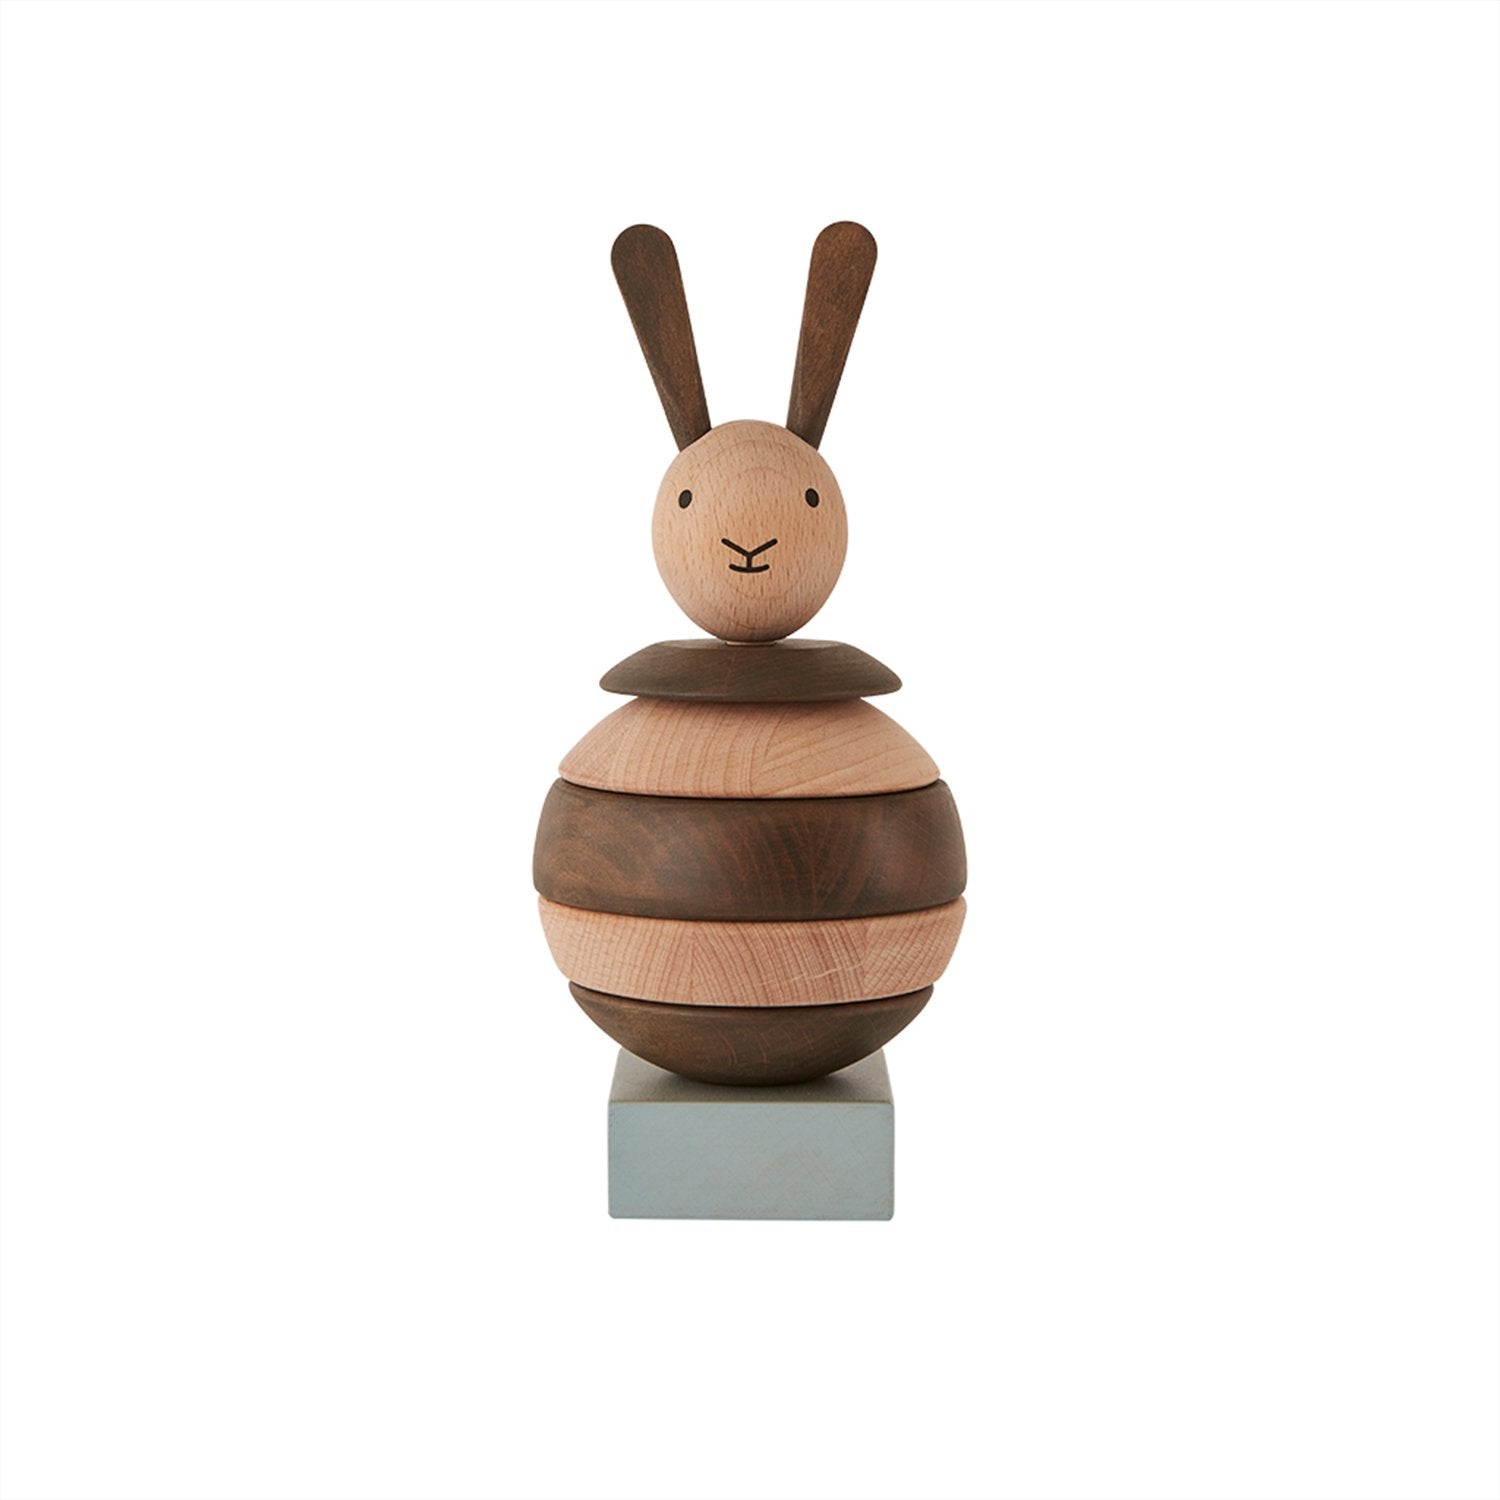 WOODEN STACKING RABBIT, OYOY